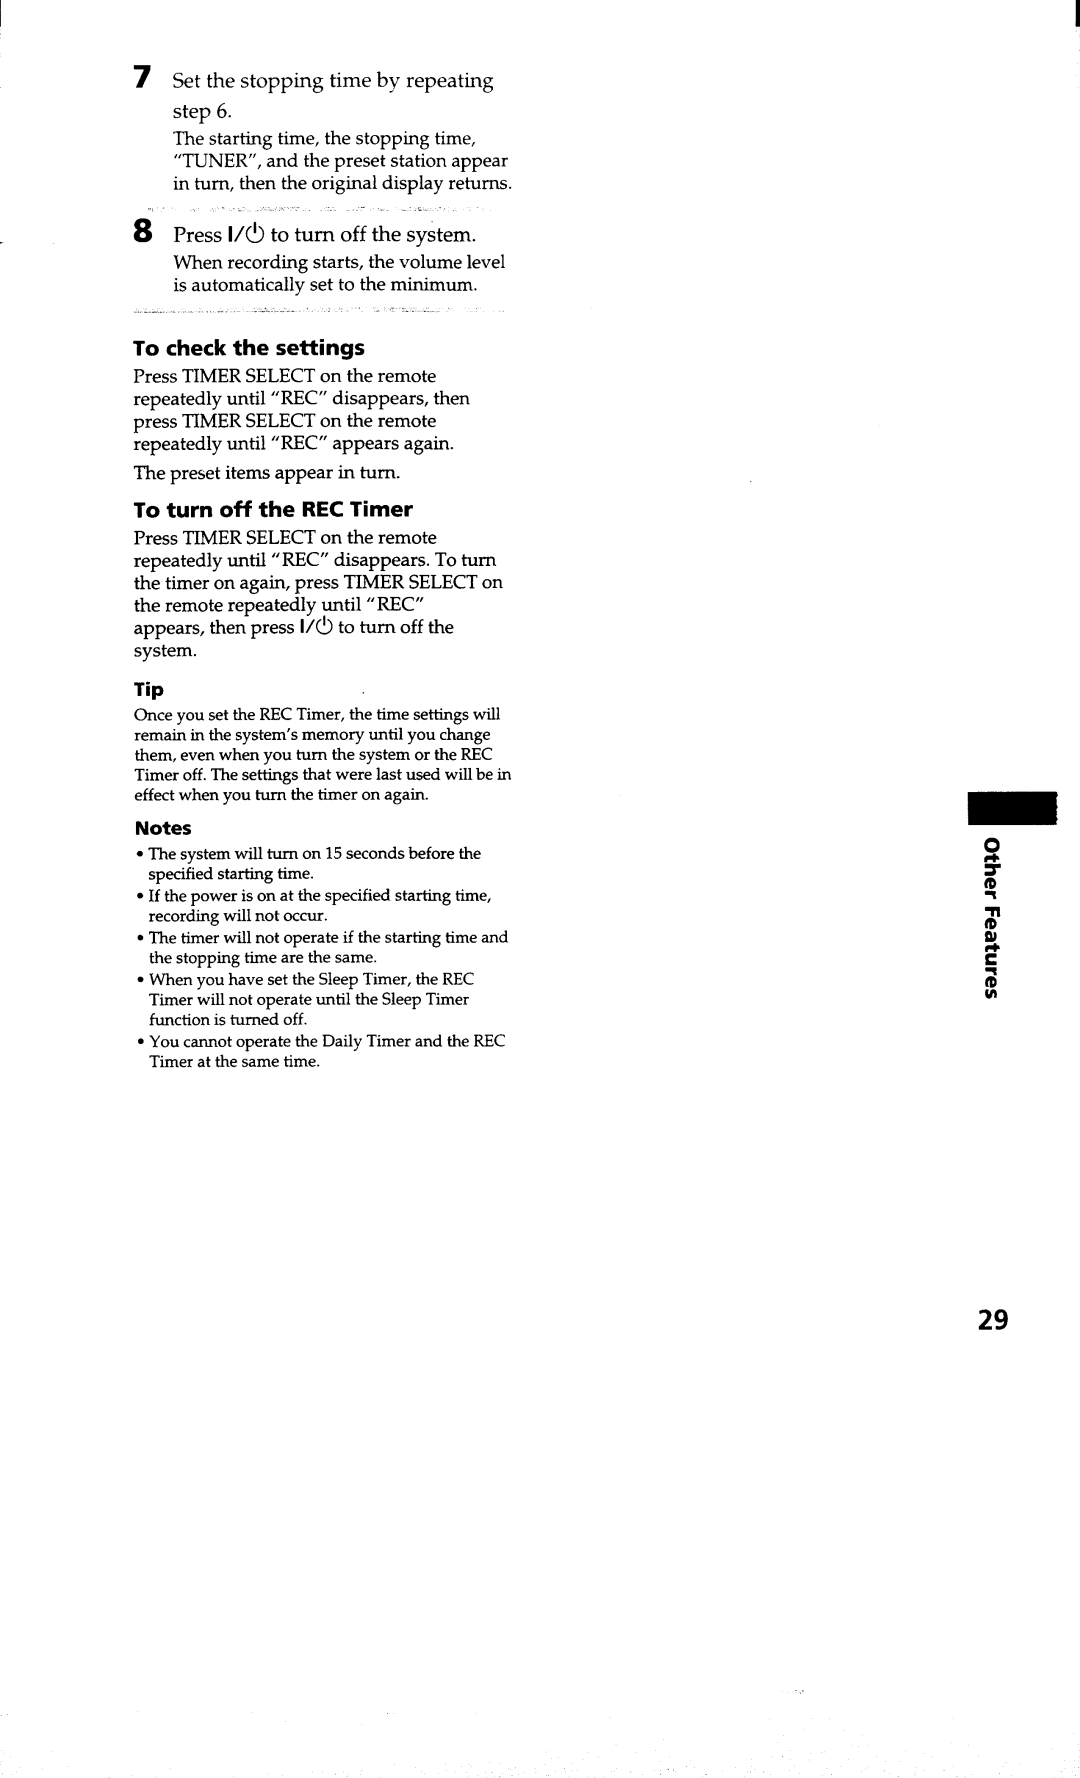 Sony CMT-CP1 manual 